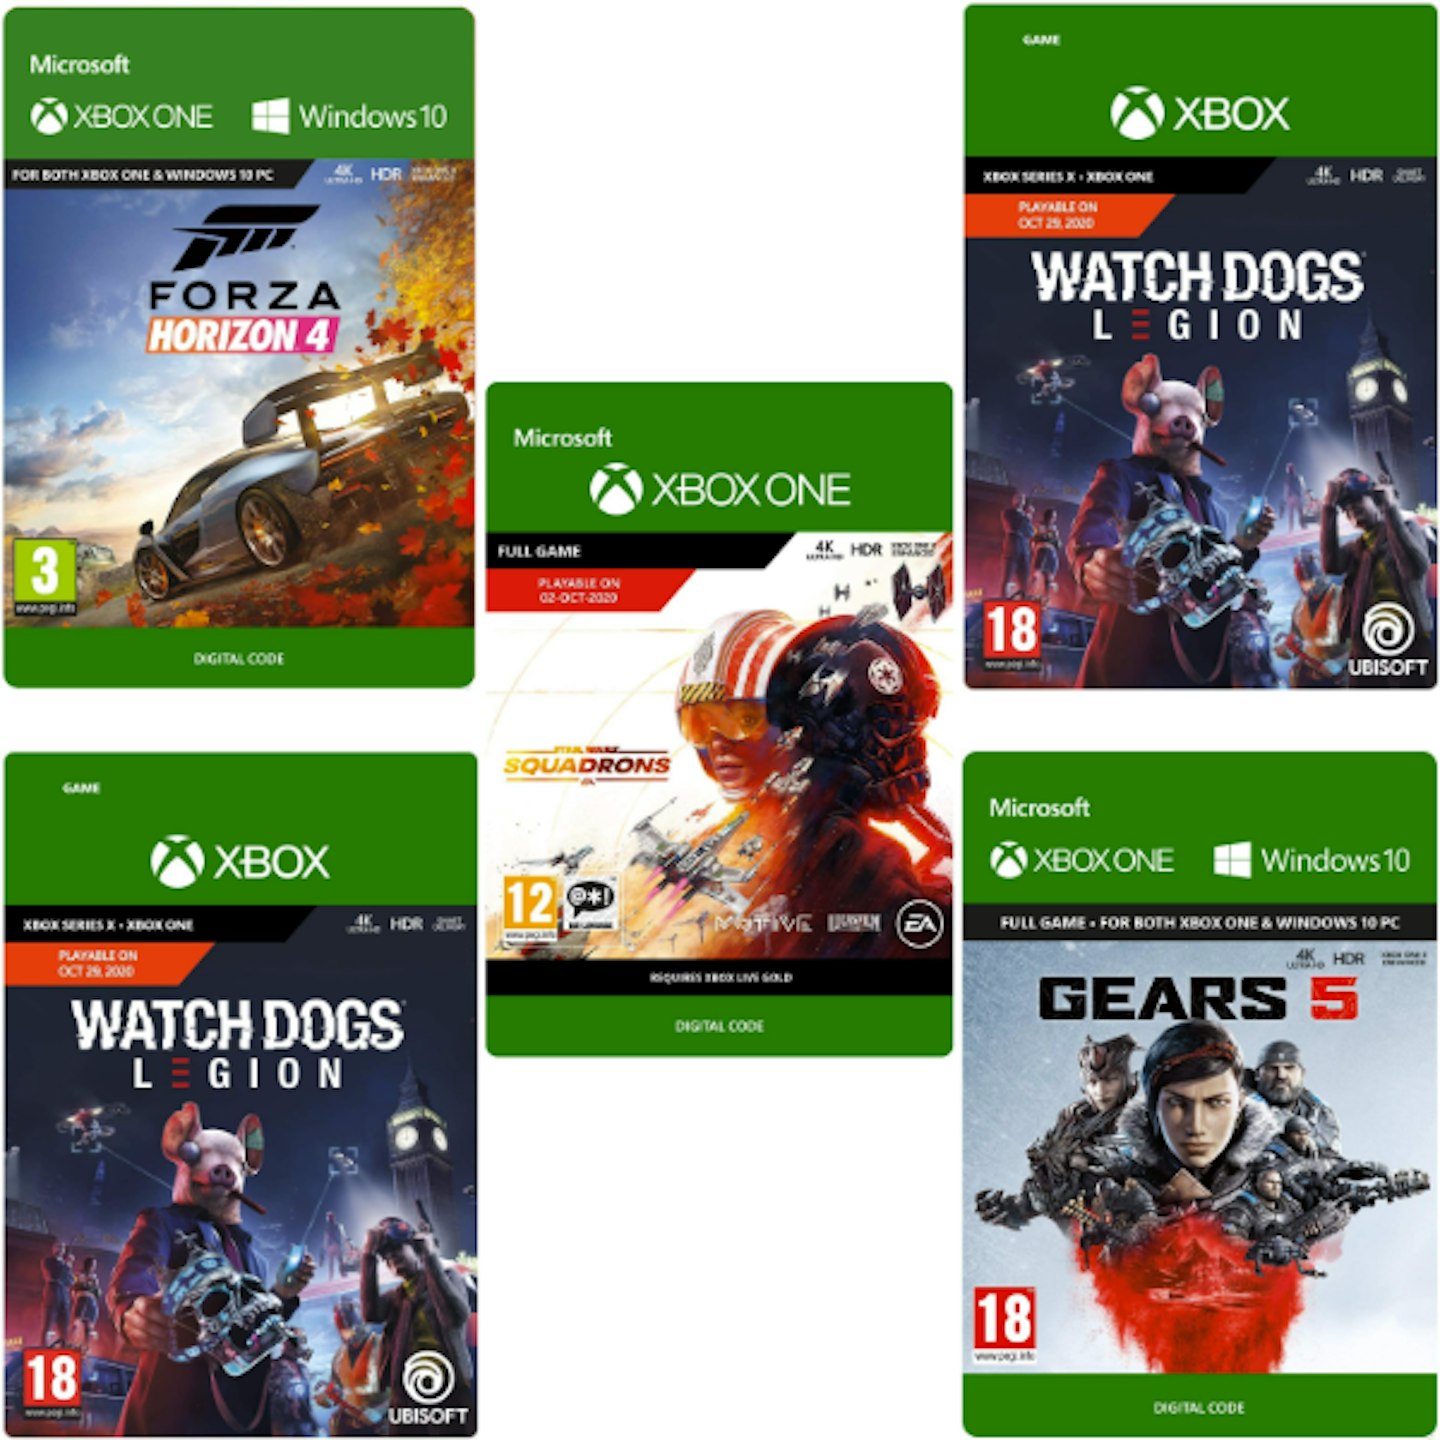 Up to 80% off Xbox Digital Games